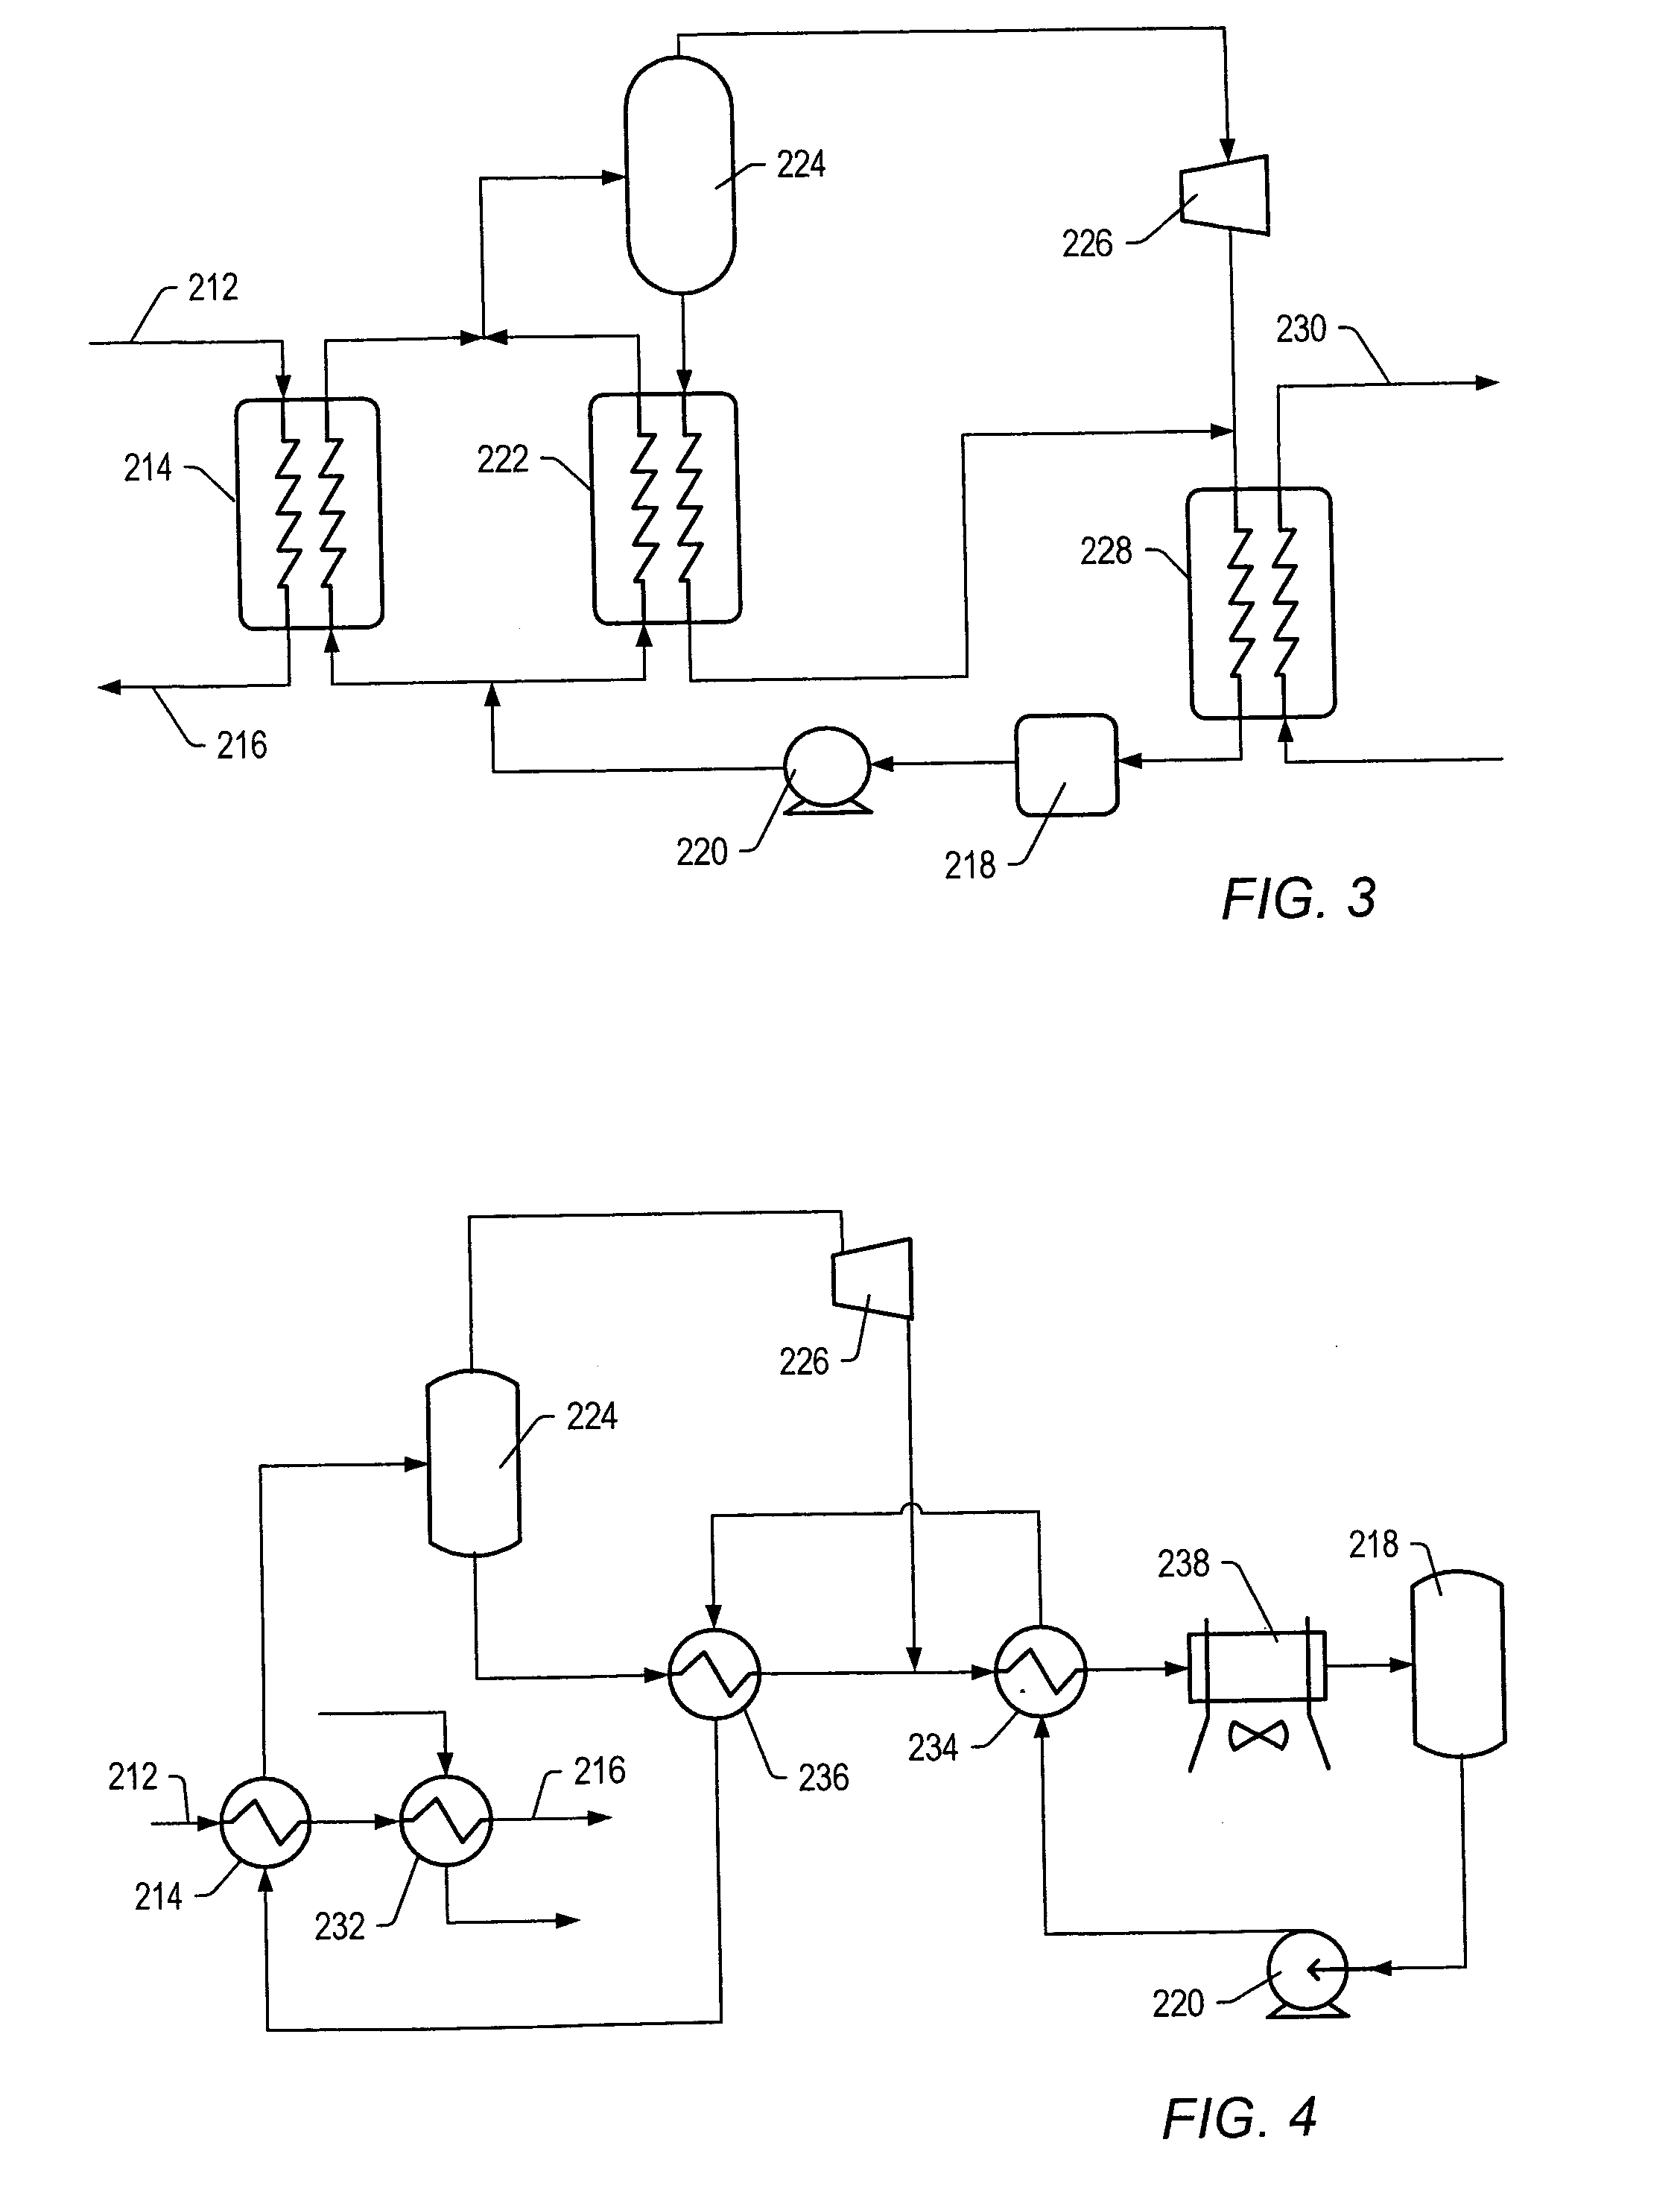 Methods of hydrotreating a liquid stream to remove clogging compounds